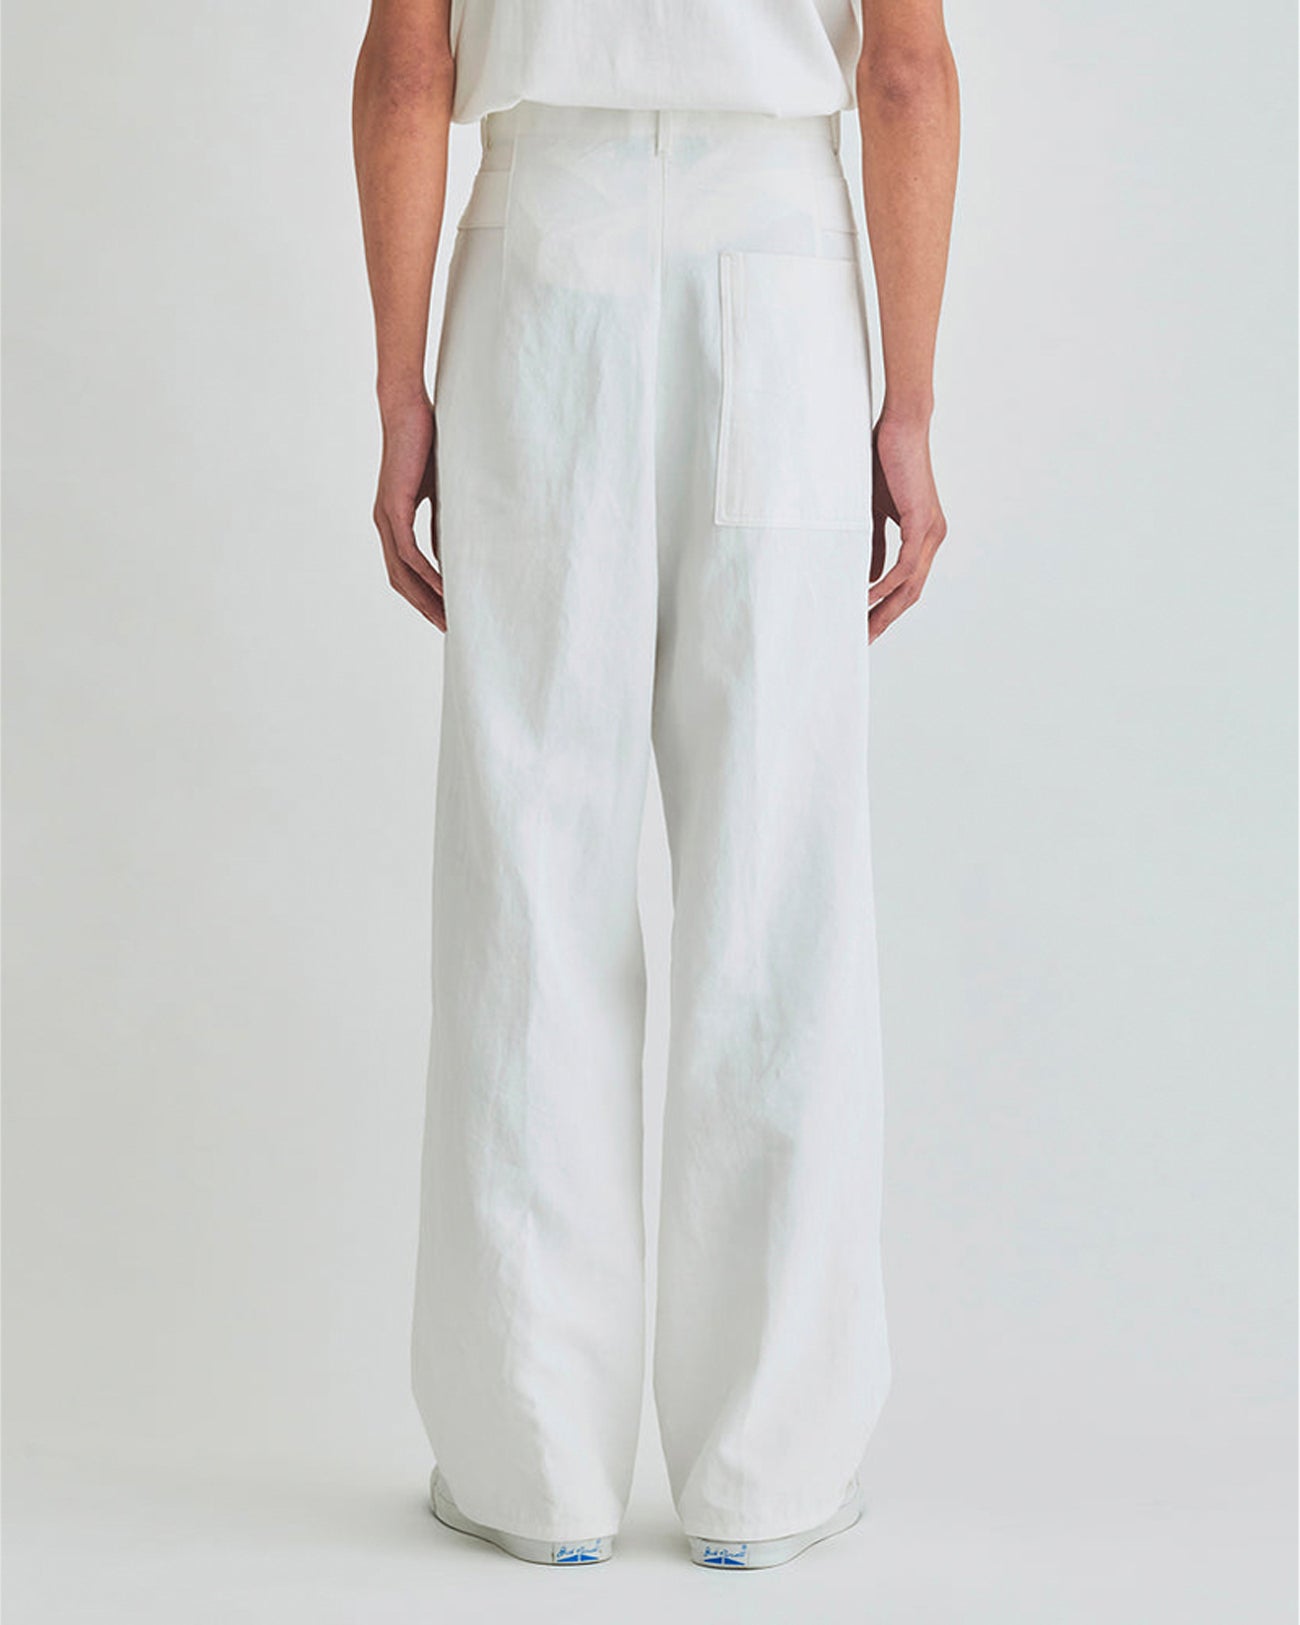 Linen Pigment Work Trousers - white - FAB4 ONLINE STORE